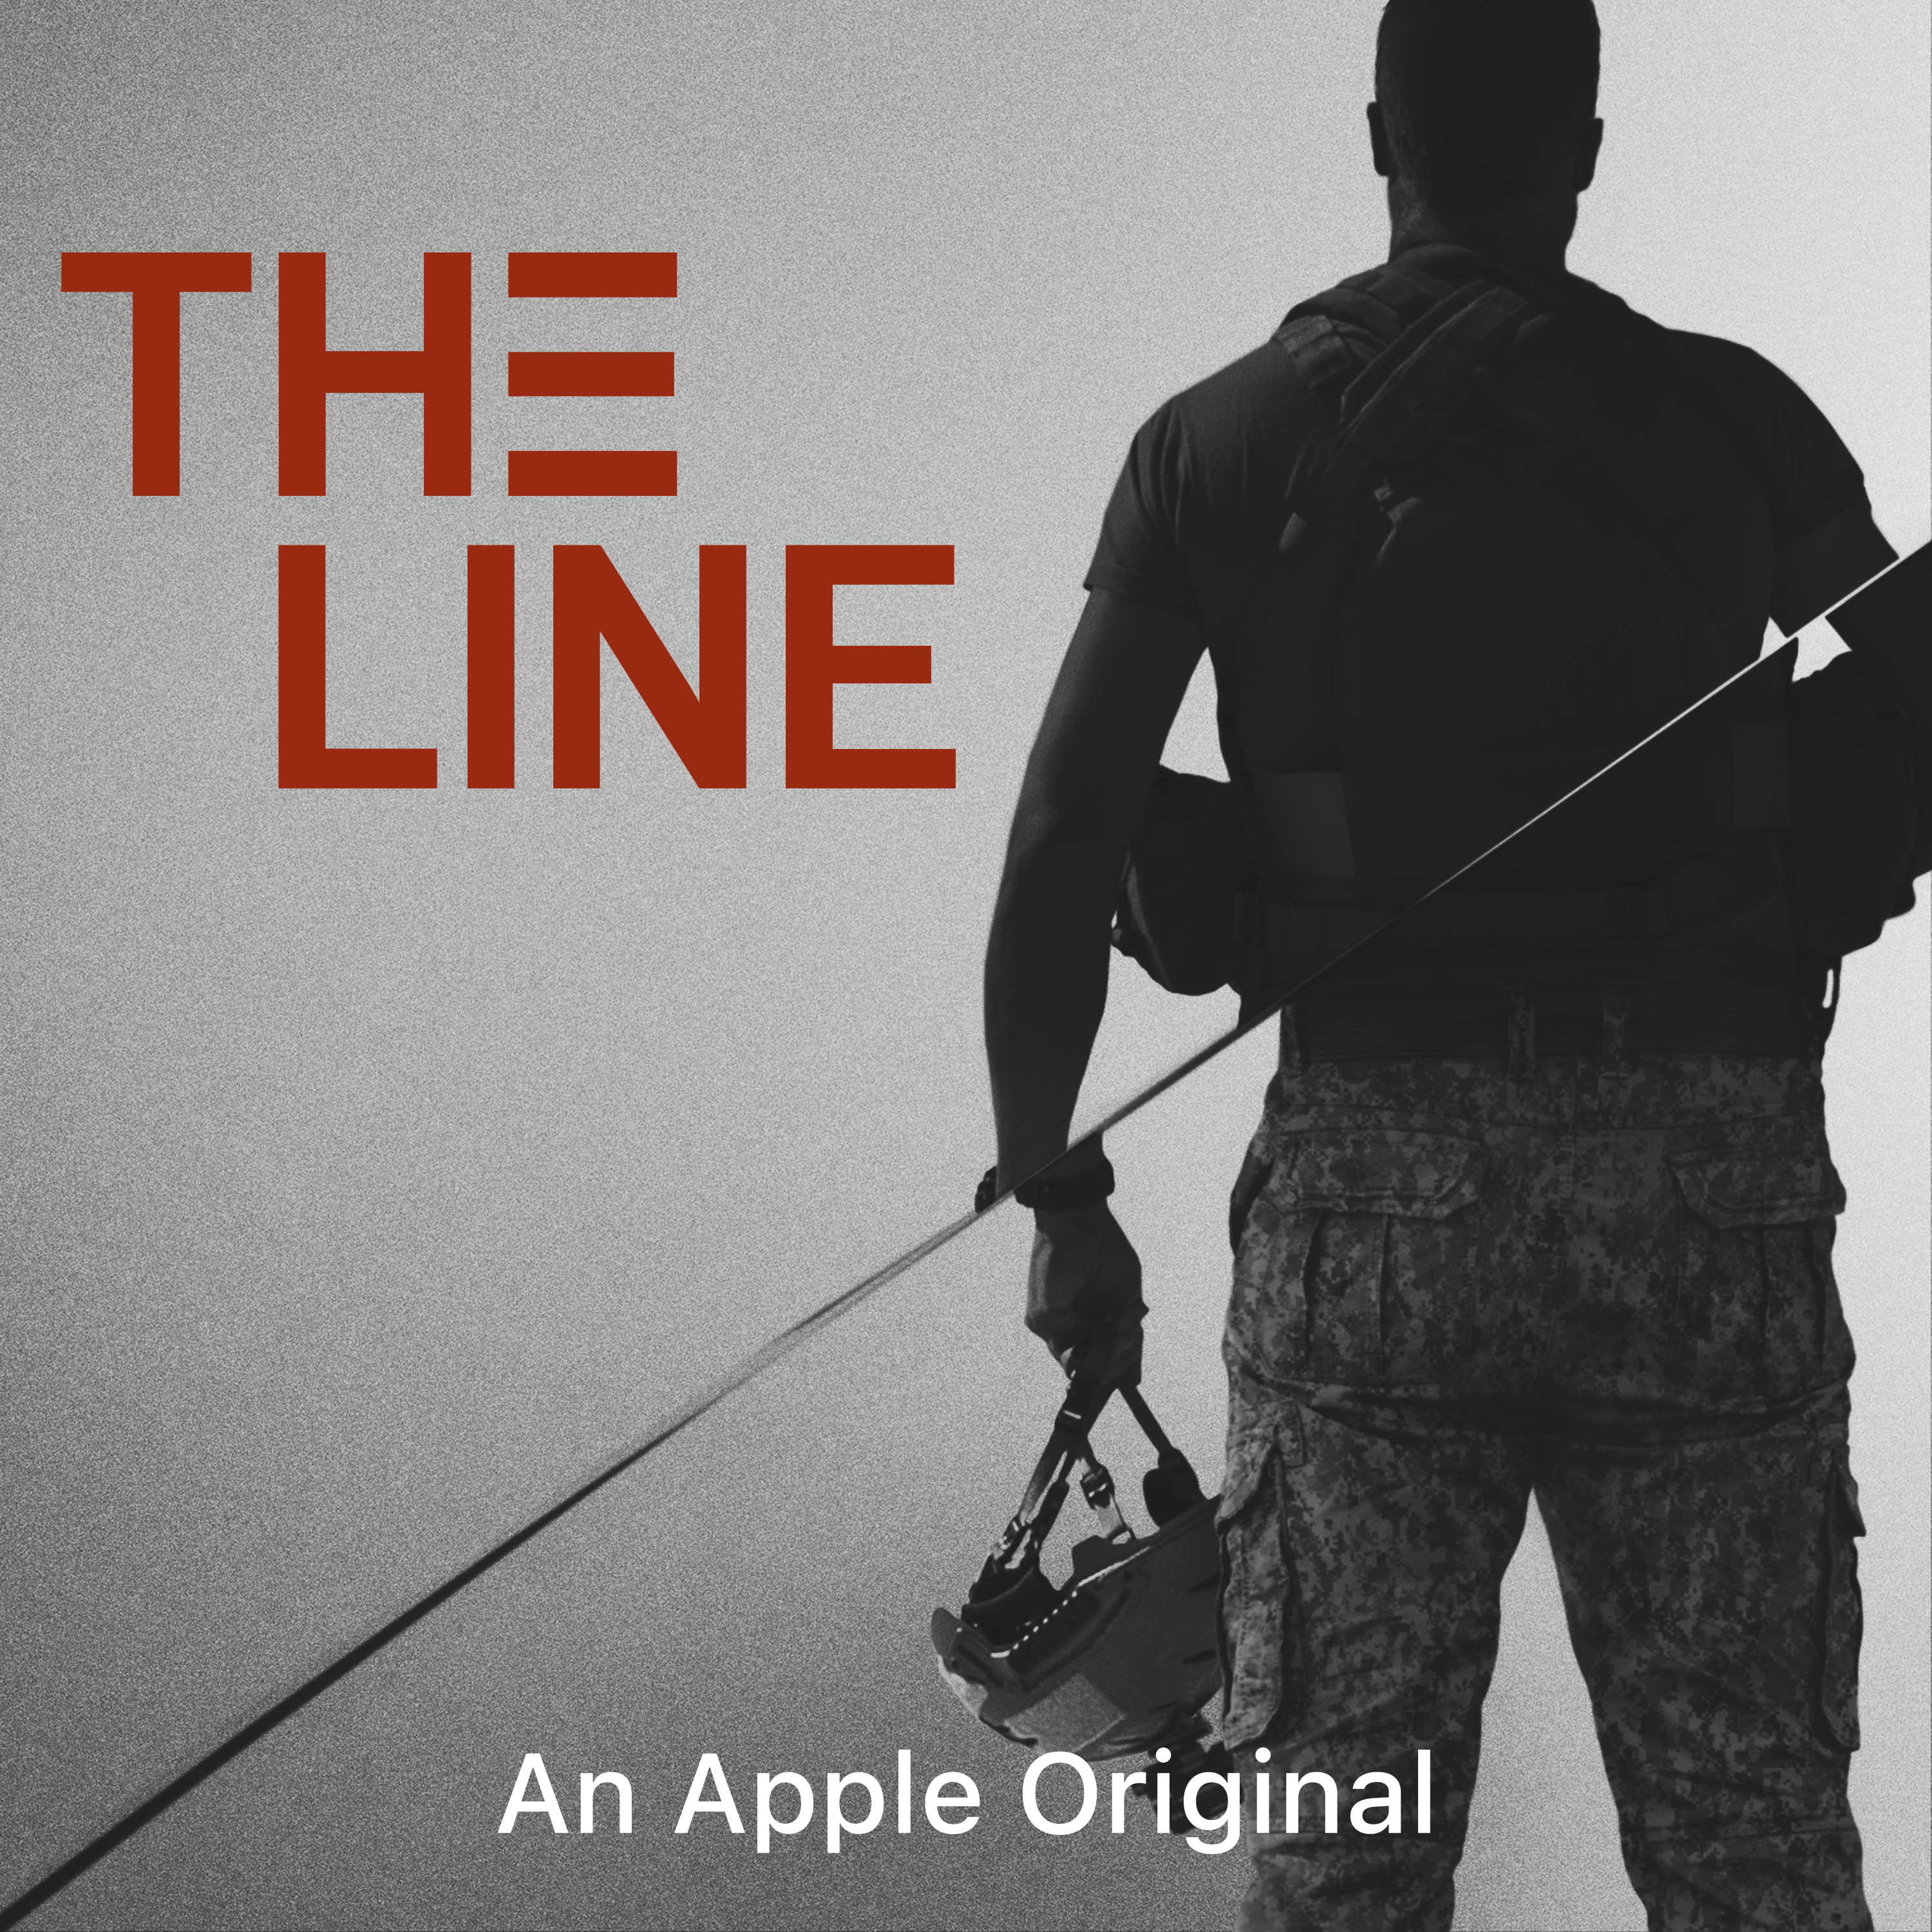 The Line: The Trial of Eddie Gallagher